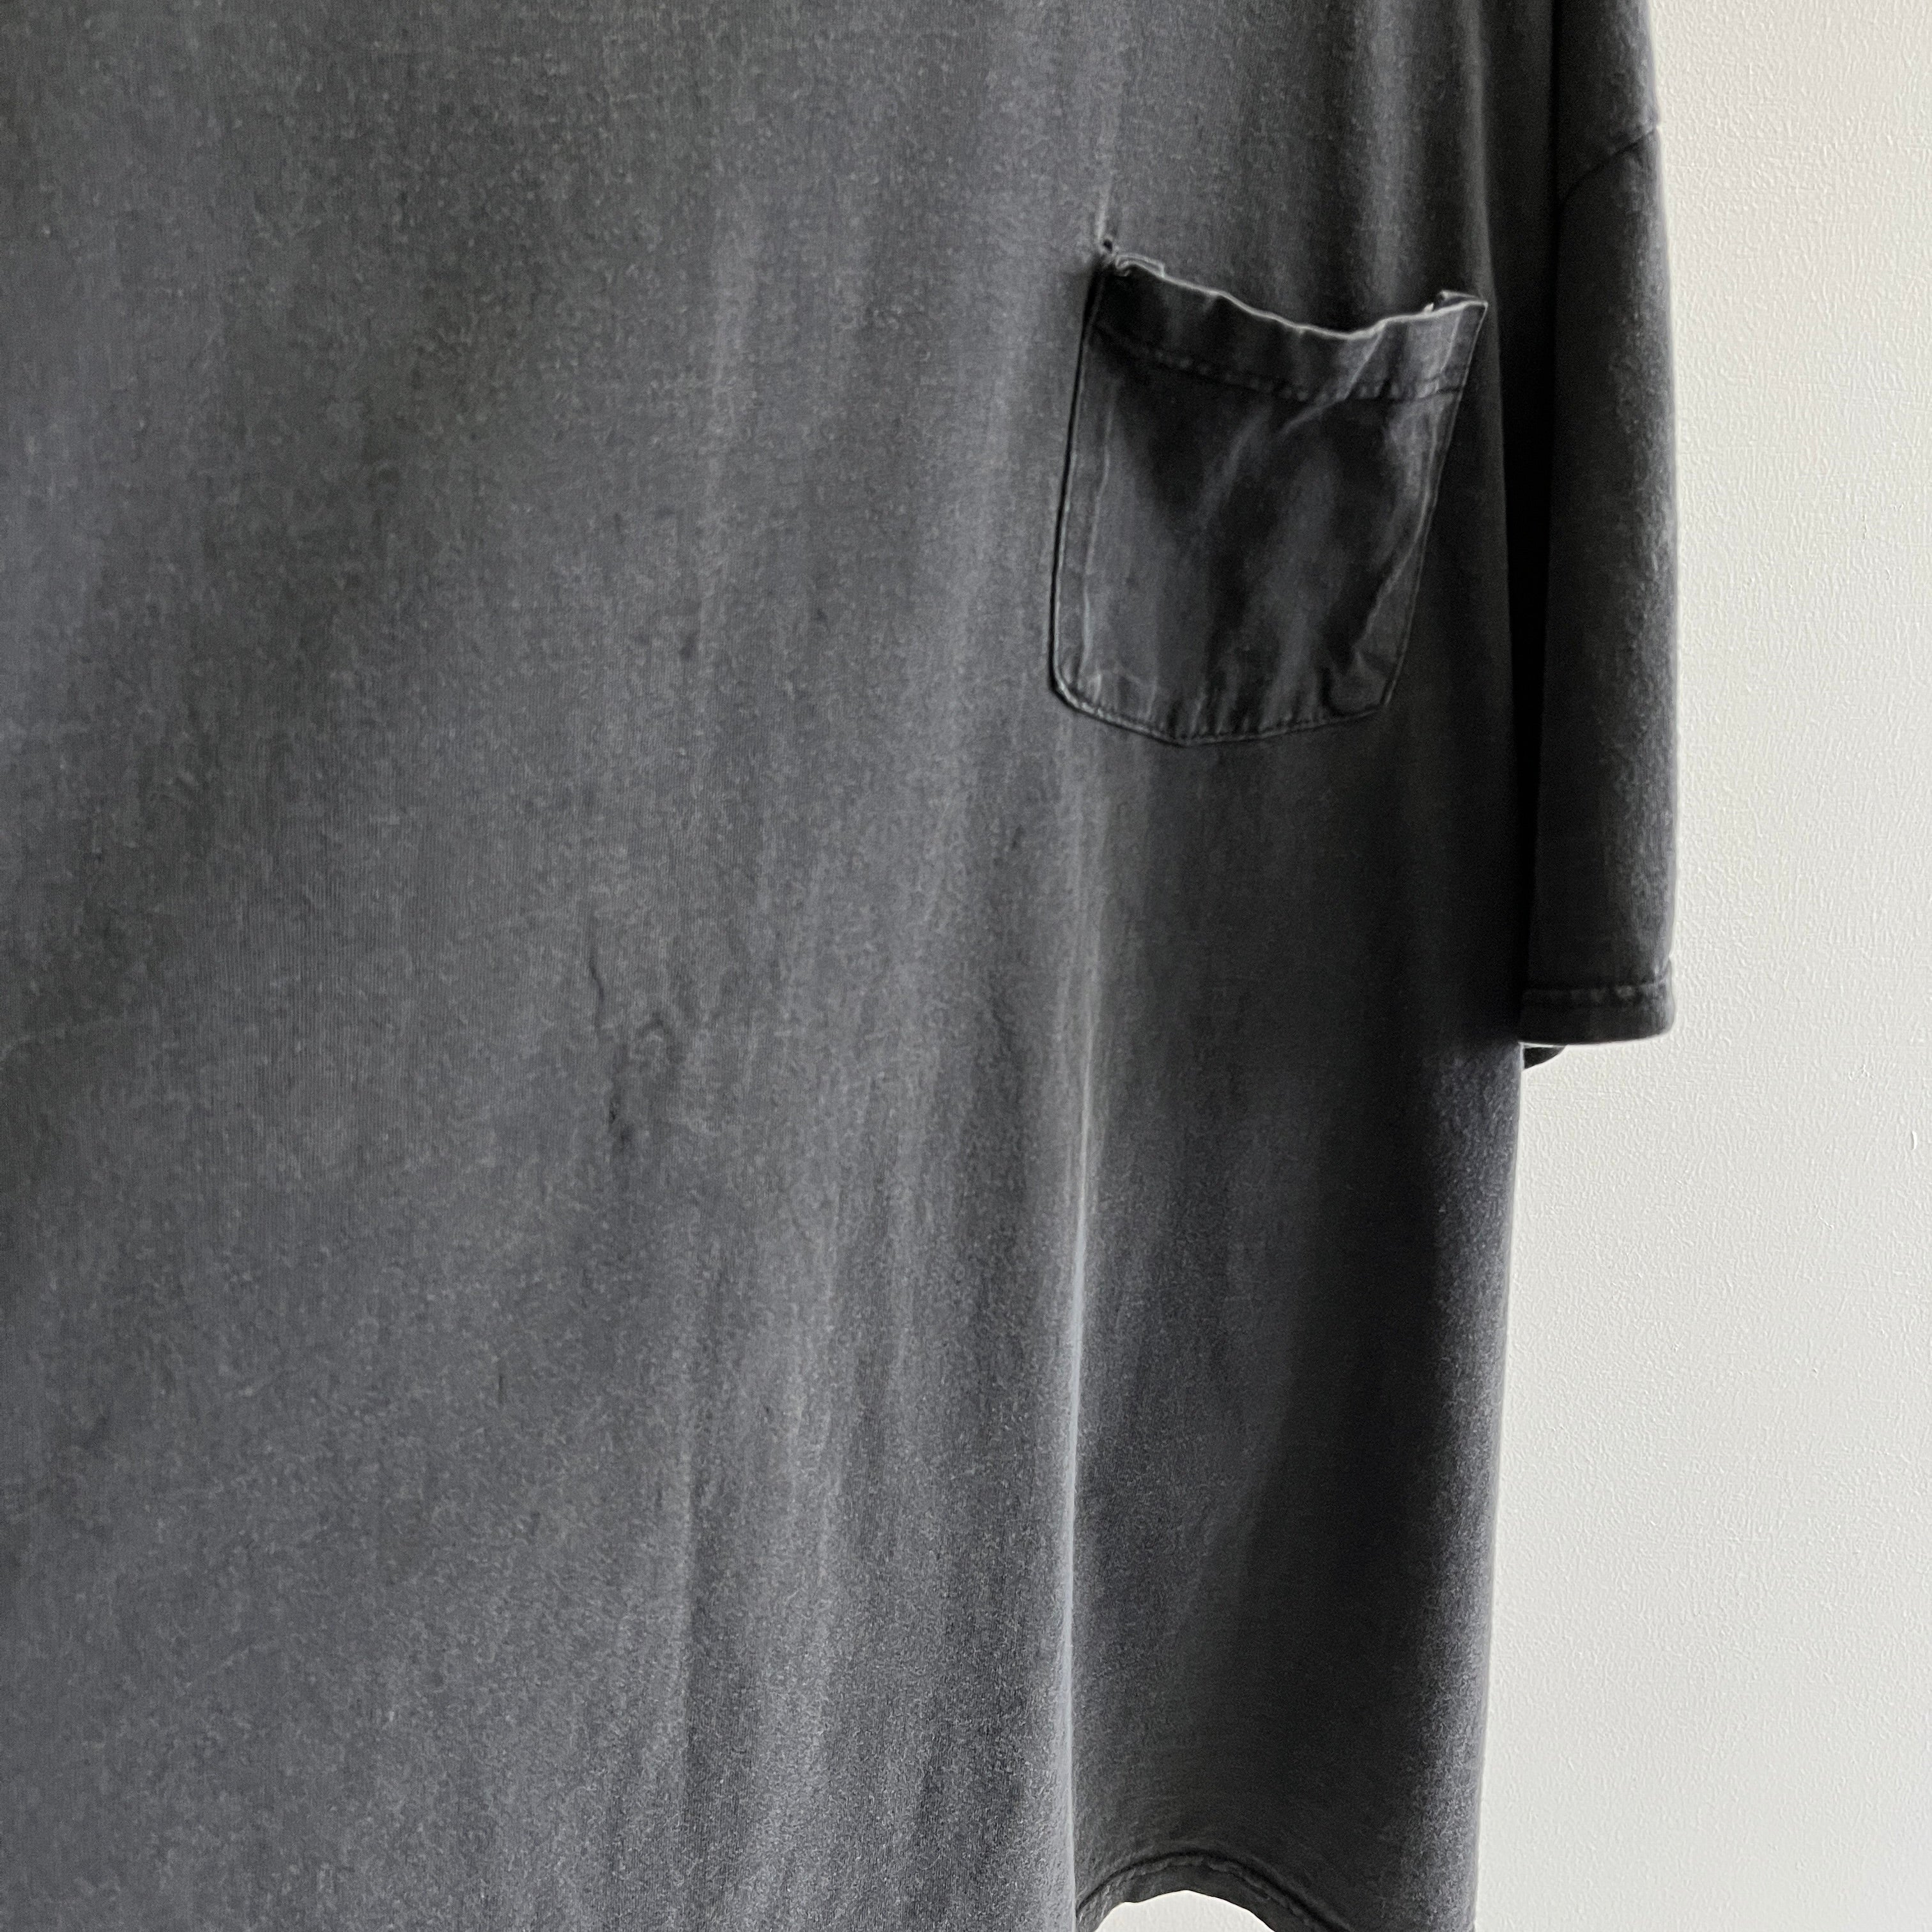 1990s Relaxed Fit Blank Black Pocket T-Shirt with an Incredible Drape